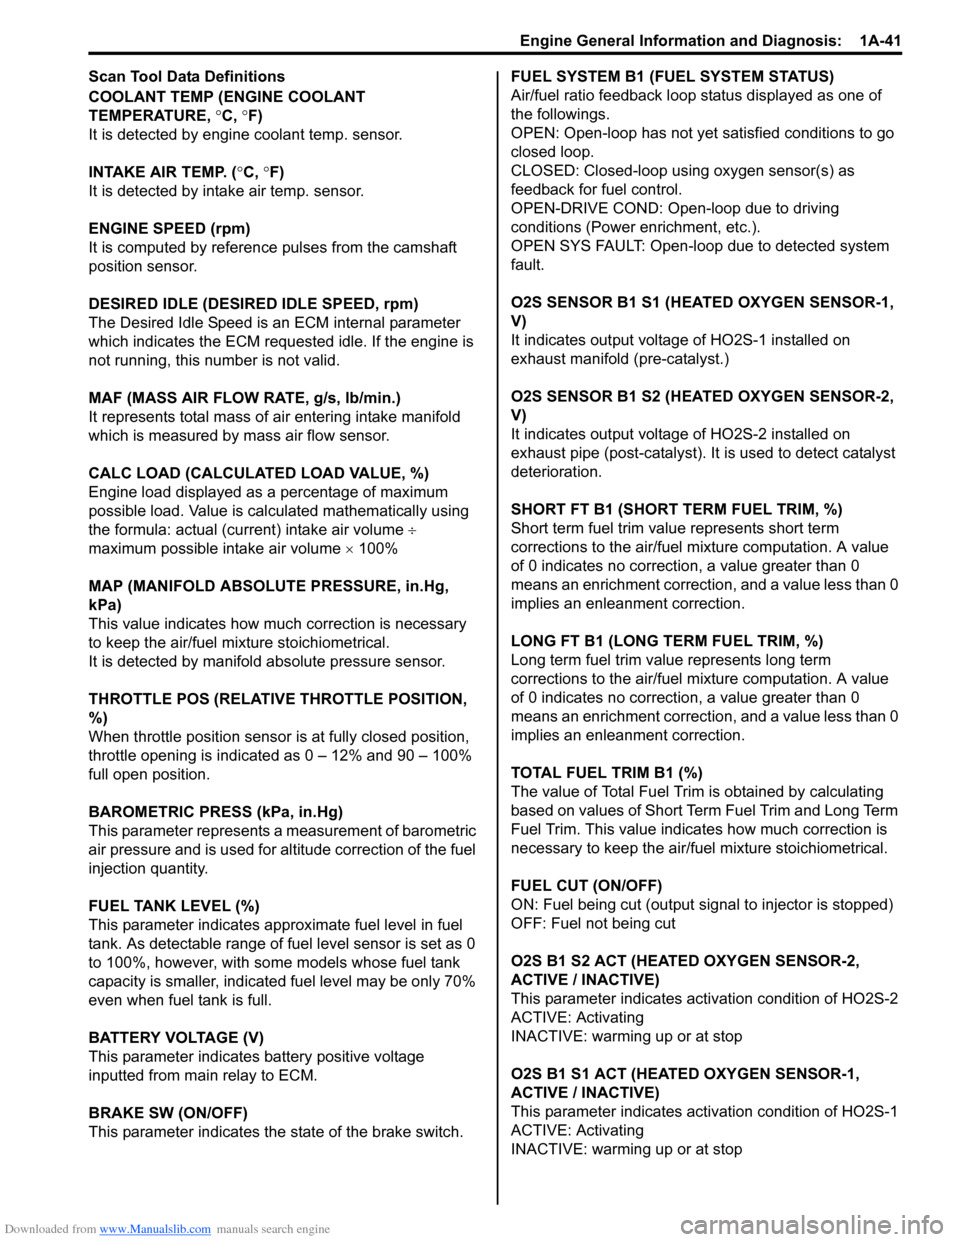 SUZUKI SX4 2006 1.G Service User Guide Downloaded from www.Manualslib.com manuals search engine Engine General Information and Diagnosis:  1A-41
Scan Tool Data Definitions
COOLANT TEMP (ENGINE COOLANT 
TEMPERATURE, °C, °F)
It is detected